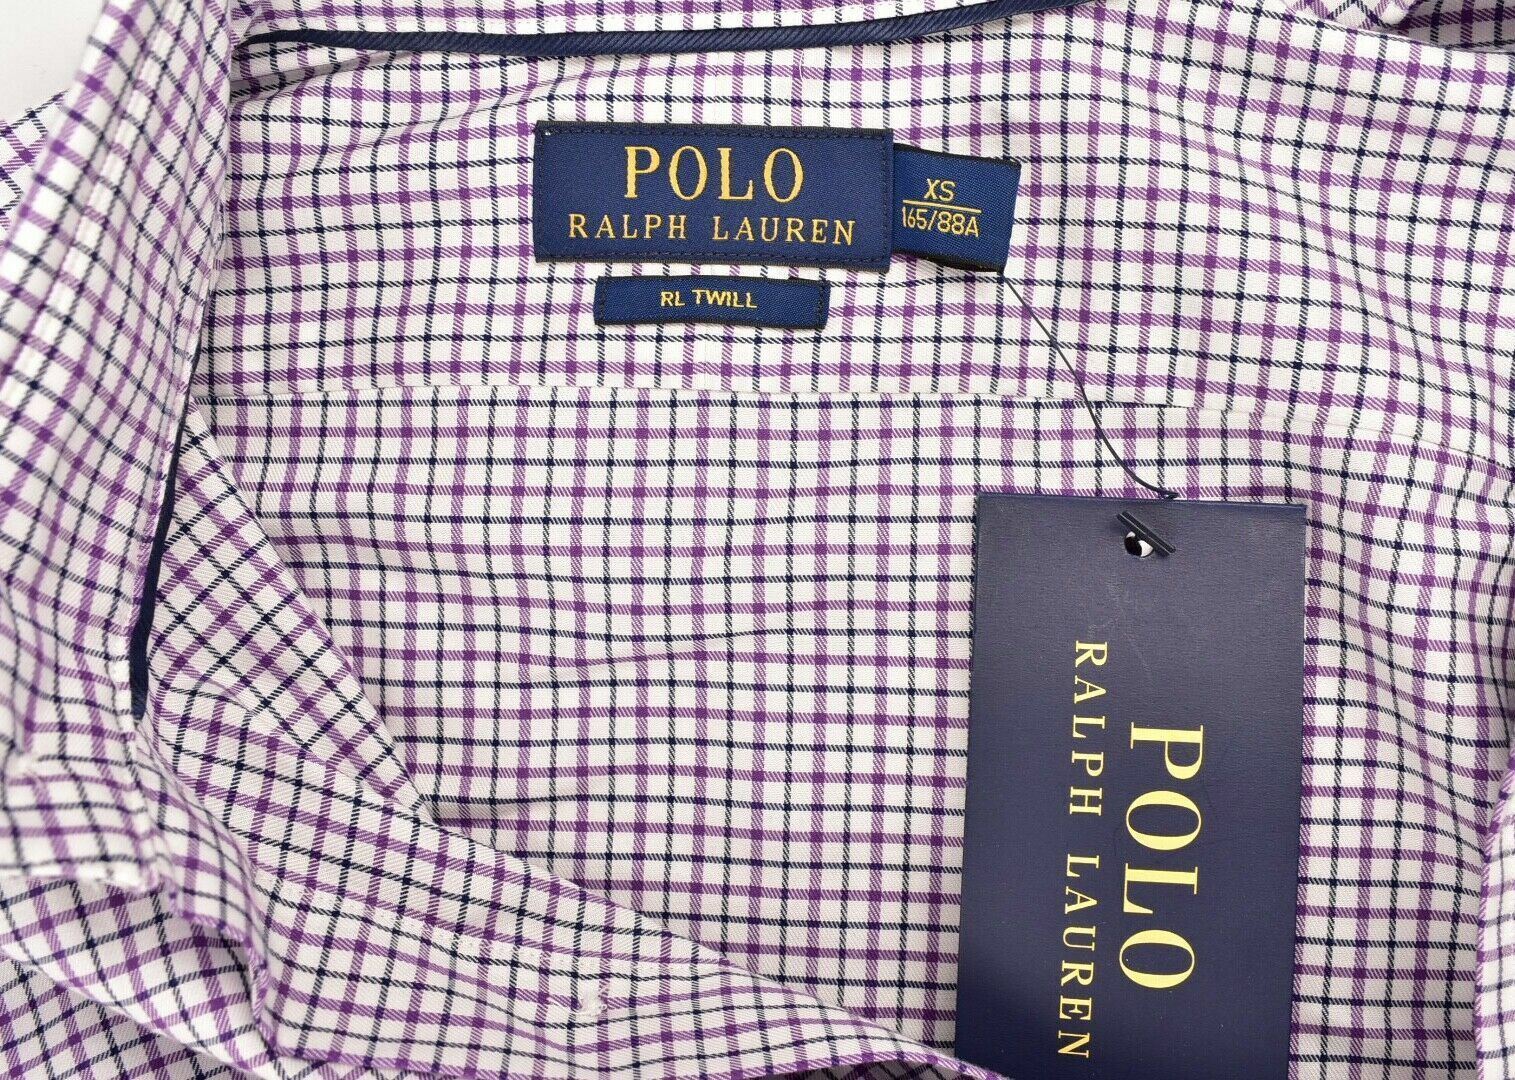 POLO RALPH LAUREN RL TWILL Mens Classic Shirt, Purple Checked, size XS size S